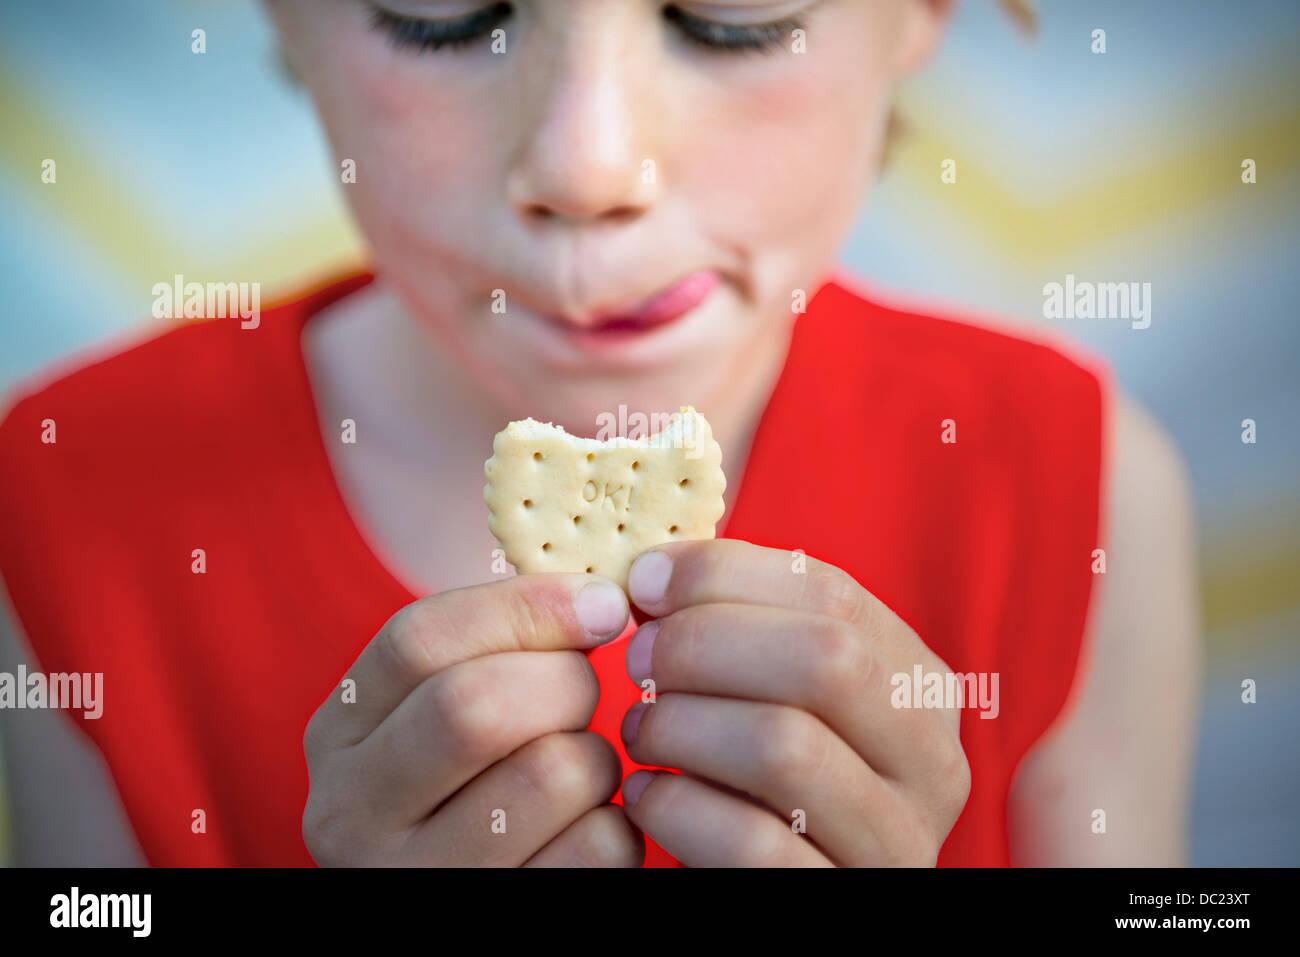 Boy holding biscuit that says 'OK!' Stock Photo